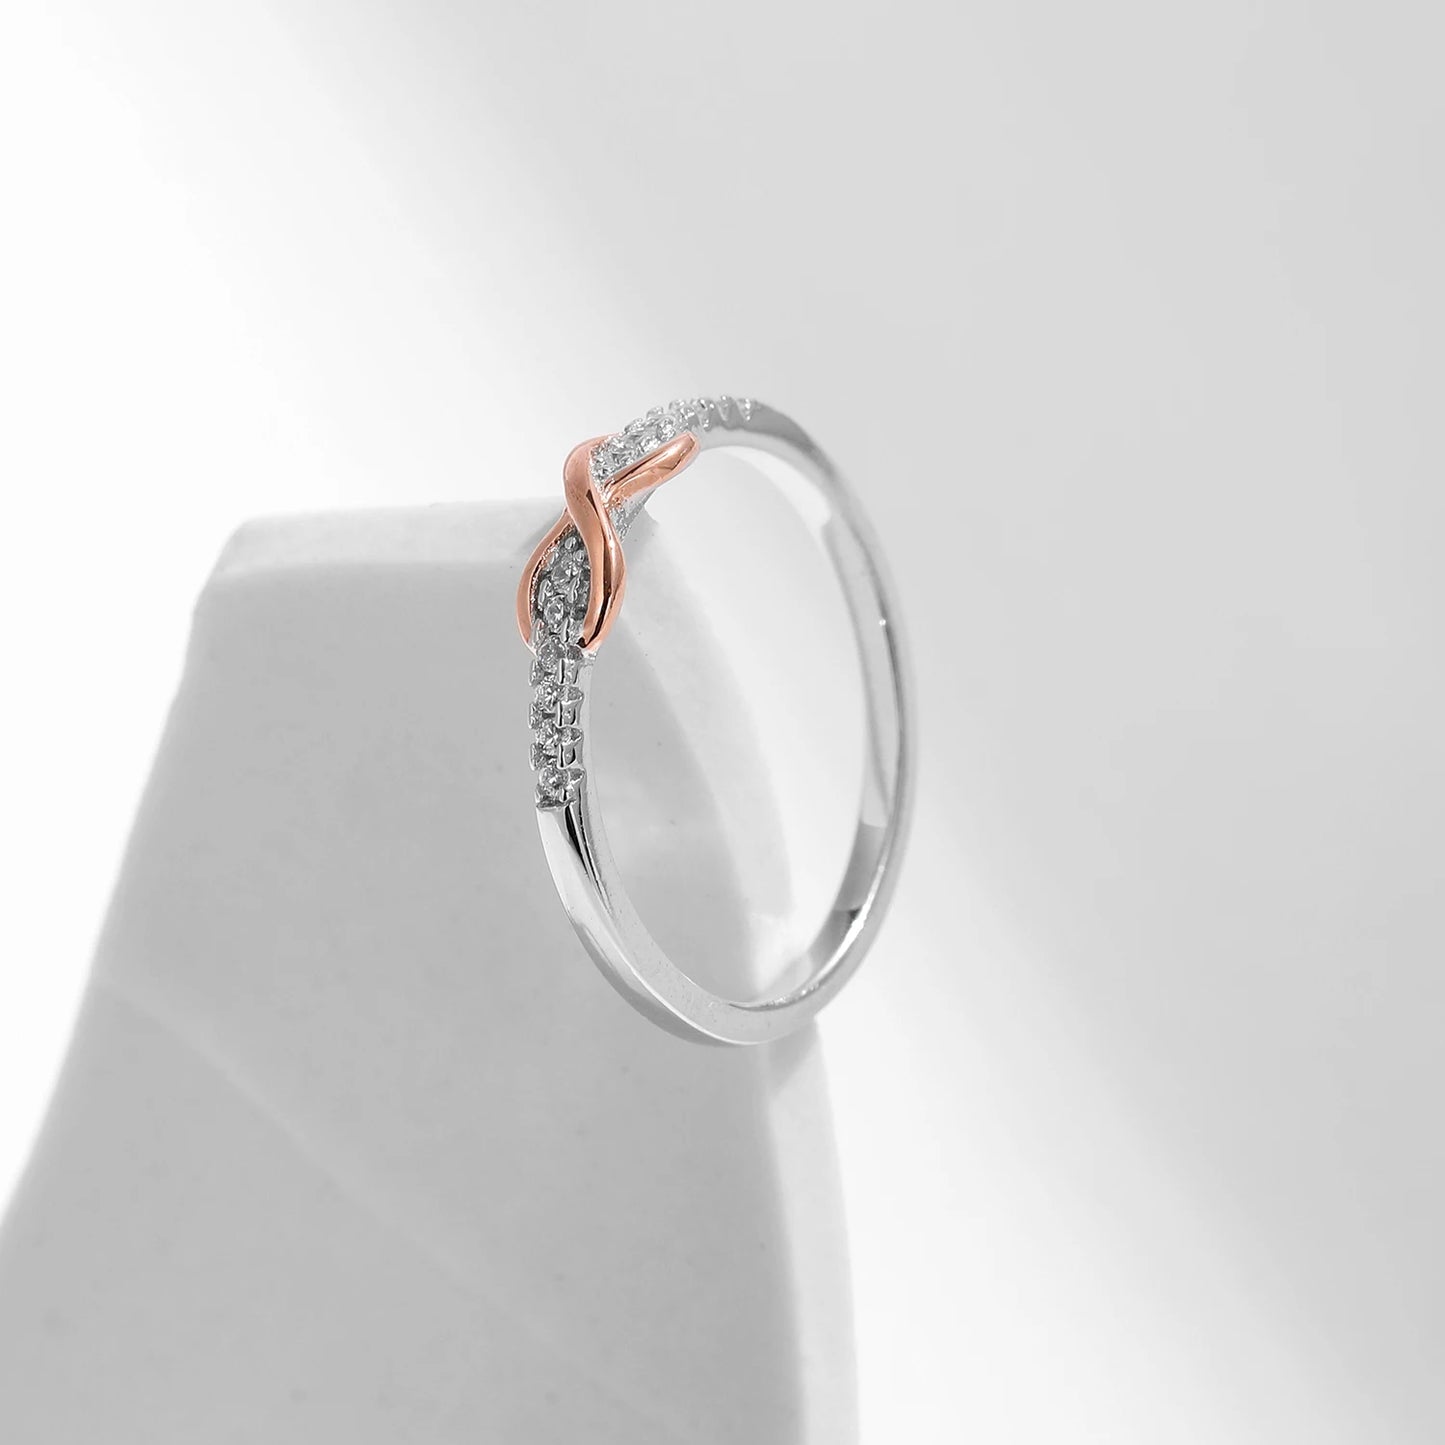 MQ Stunning S925 Silver Love Ring: Perfect for Women